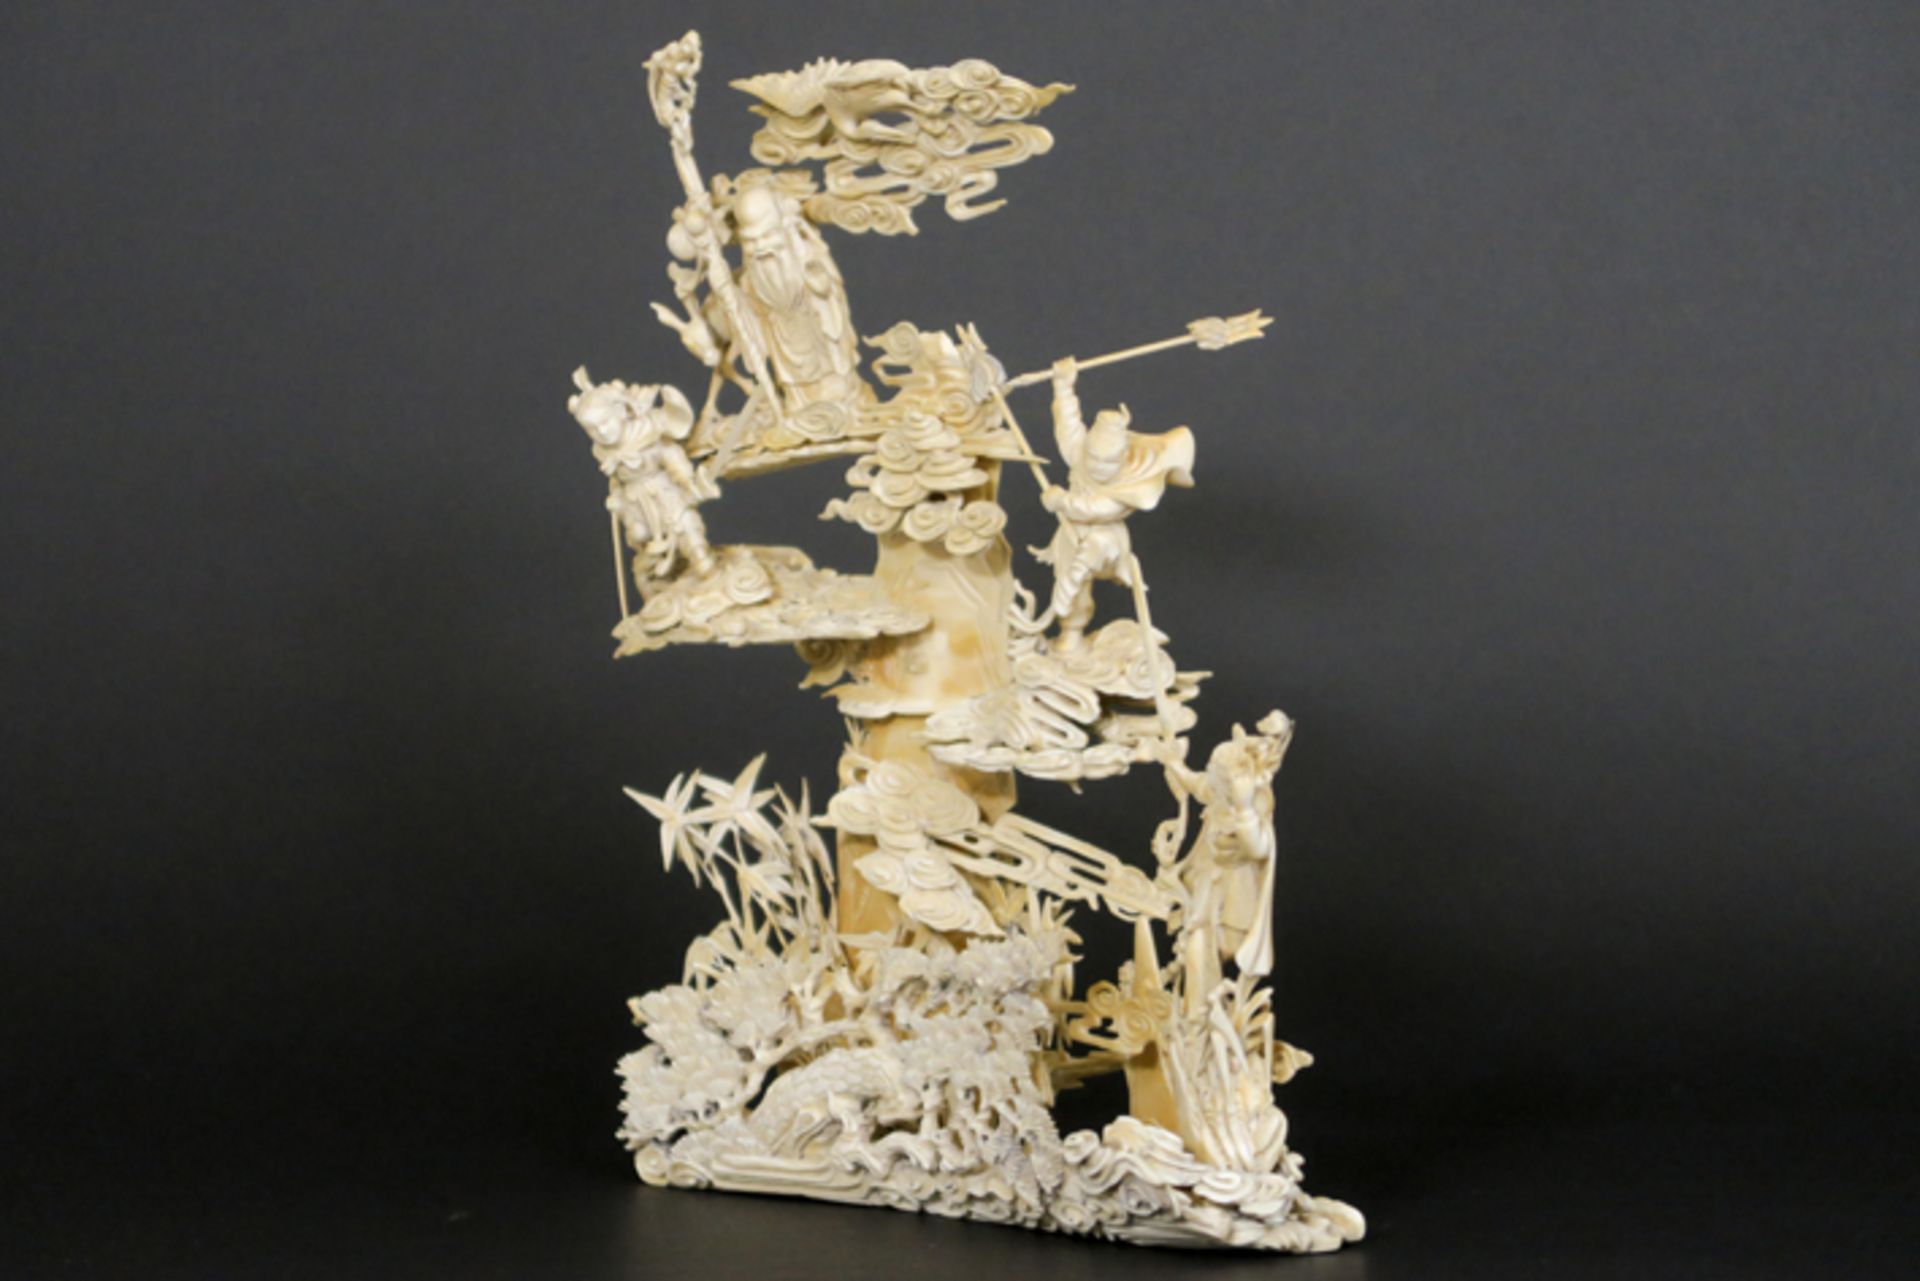 19th Cent. Chinese "Sage with three figures in the clouds" sculpture in ivory - - [...] - Image 2 of 6